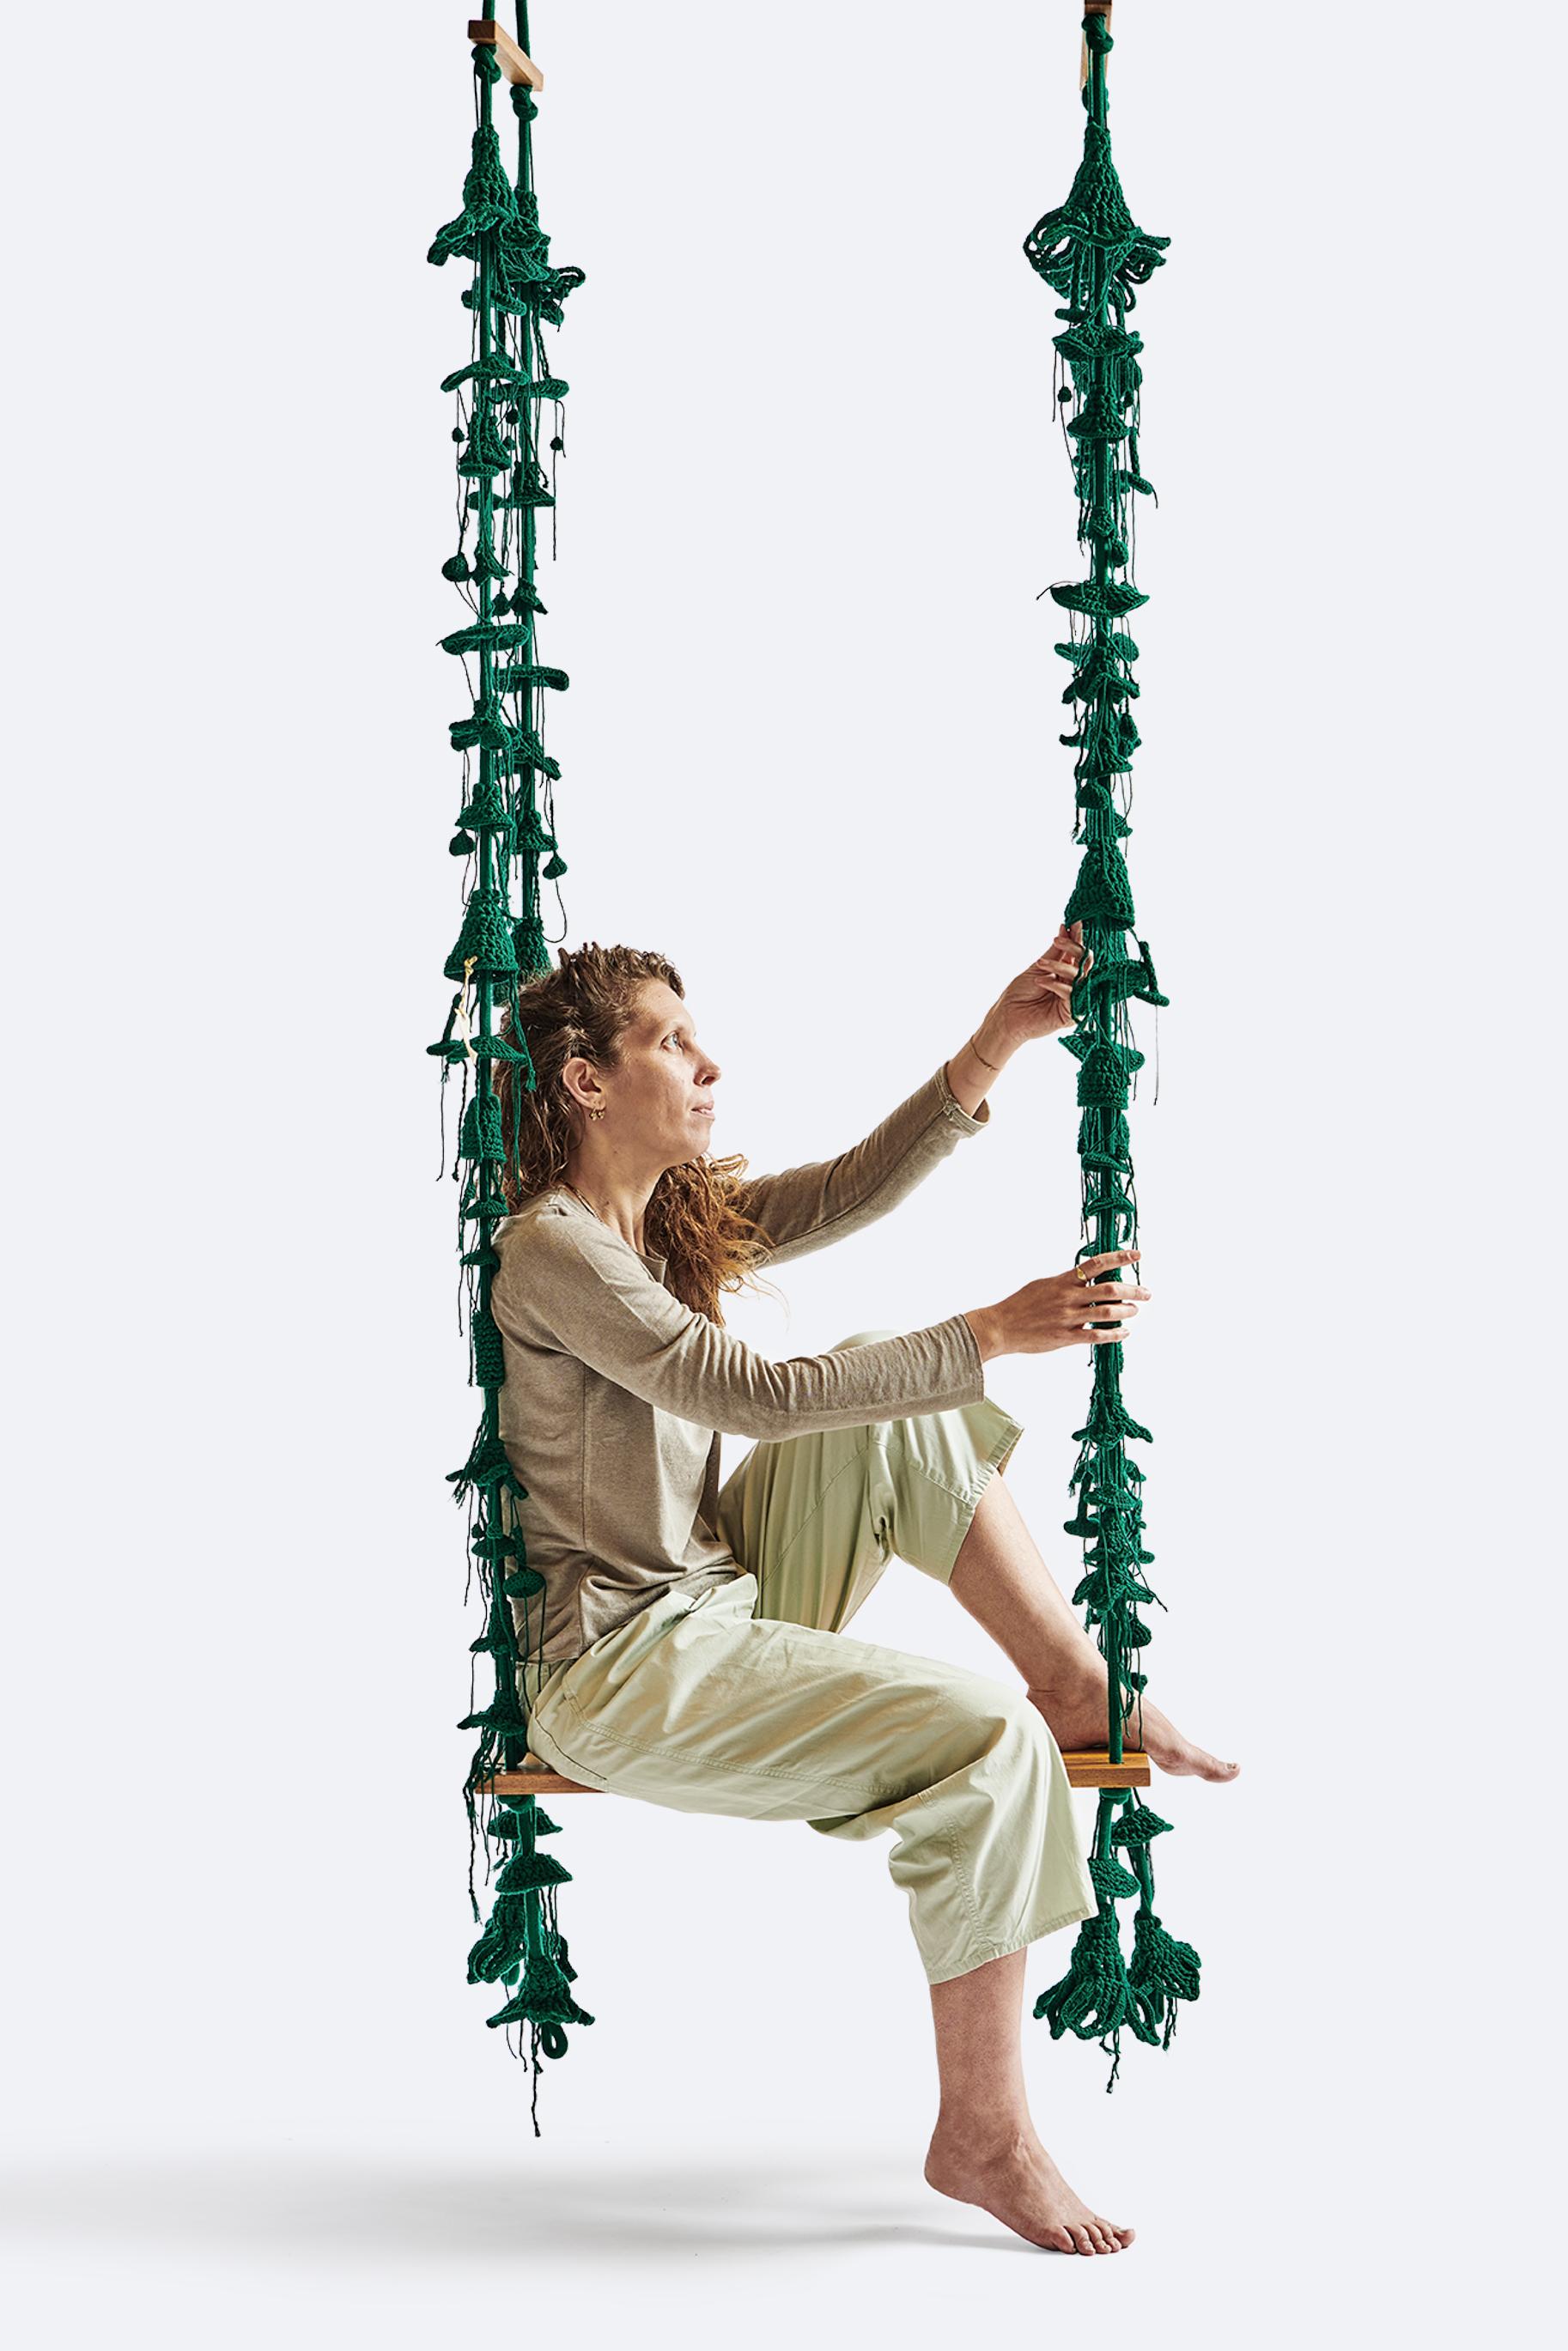 The iota outdoor swing is inspired by climbing plants and branches in the summer, when the weather is dry. The colors are inspired by a Scandinavian pallet, dunes and naked trees. They aim to take the user to a wild, natural, fantastic place. The